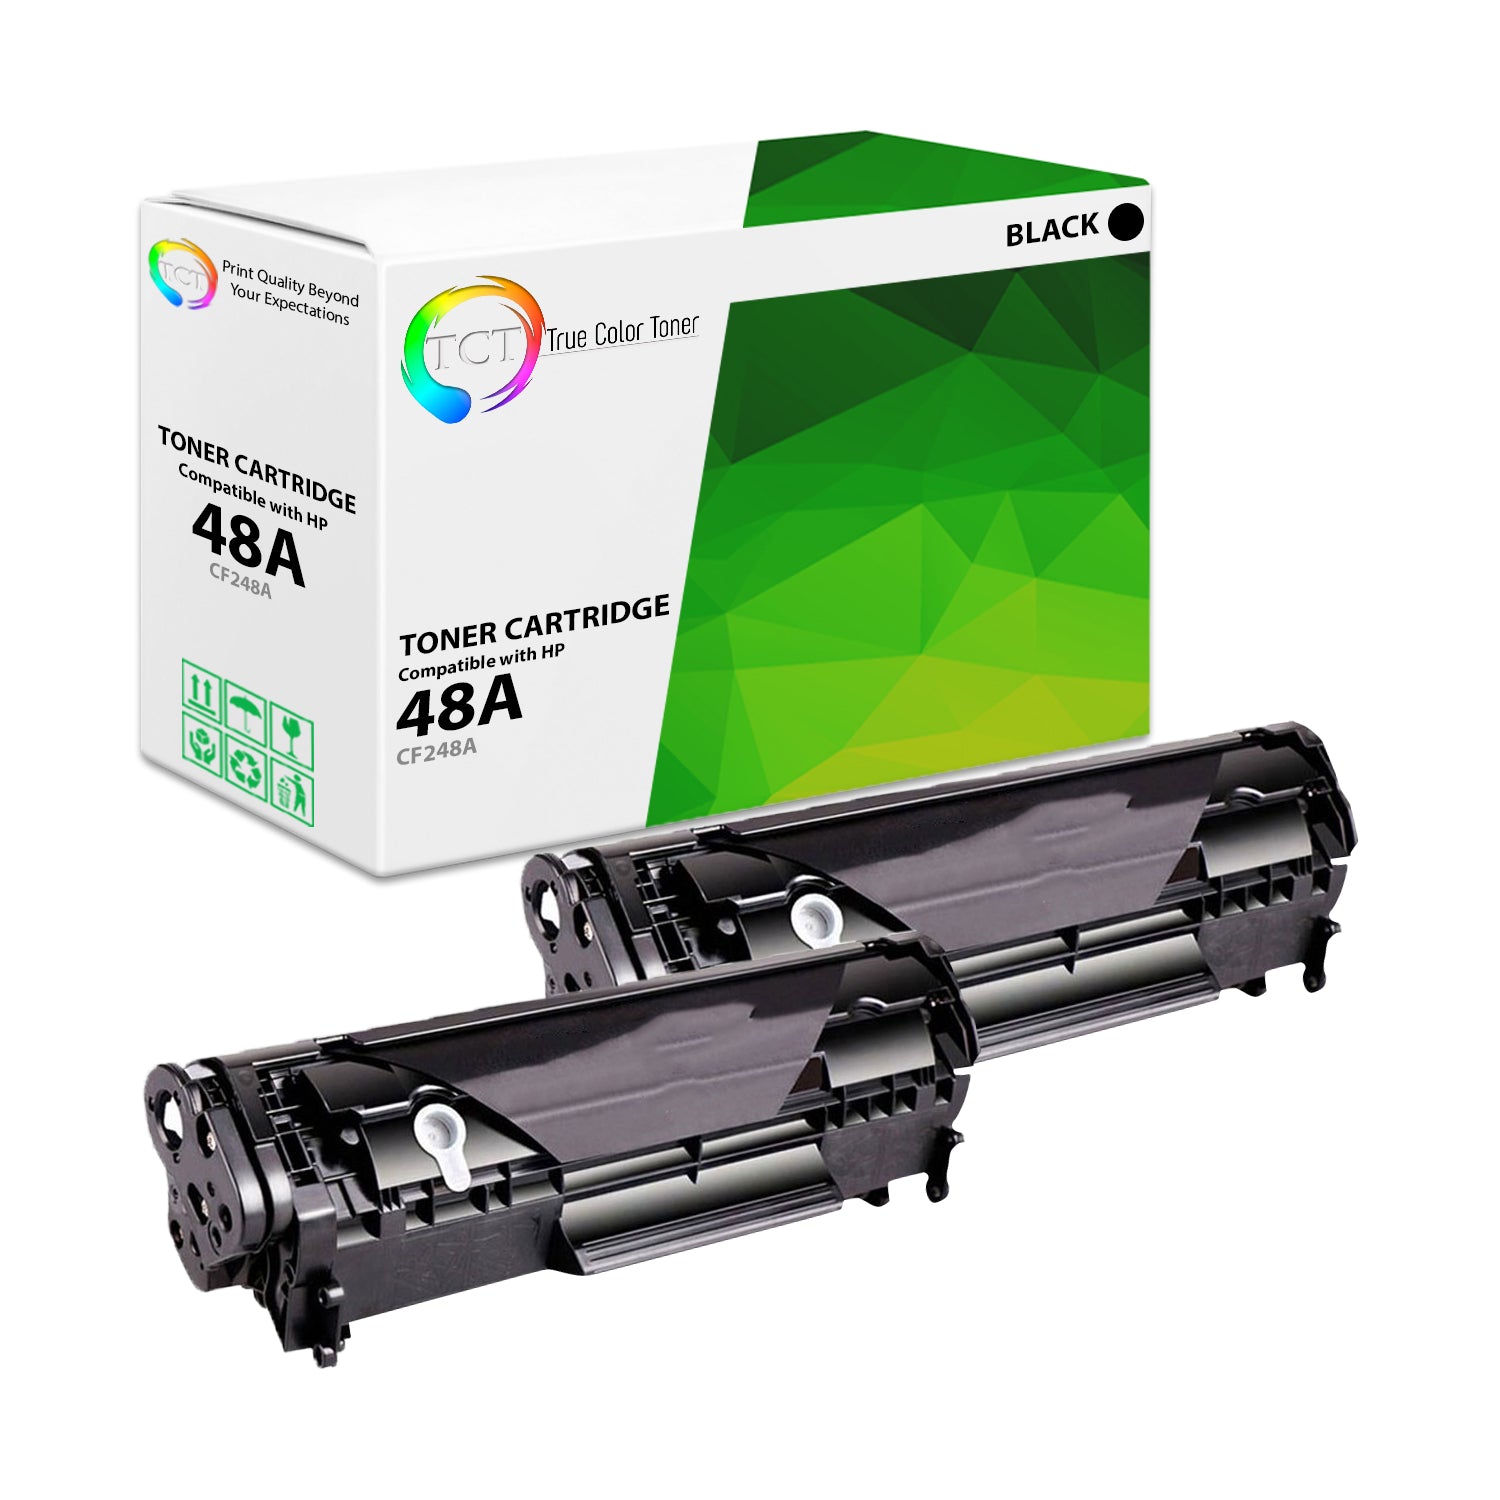 TCT Compatible Toner Cartridge Replacement for the HP 48A Series - 2 Pack Black